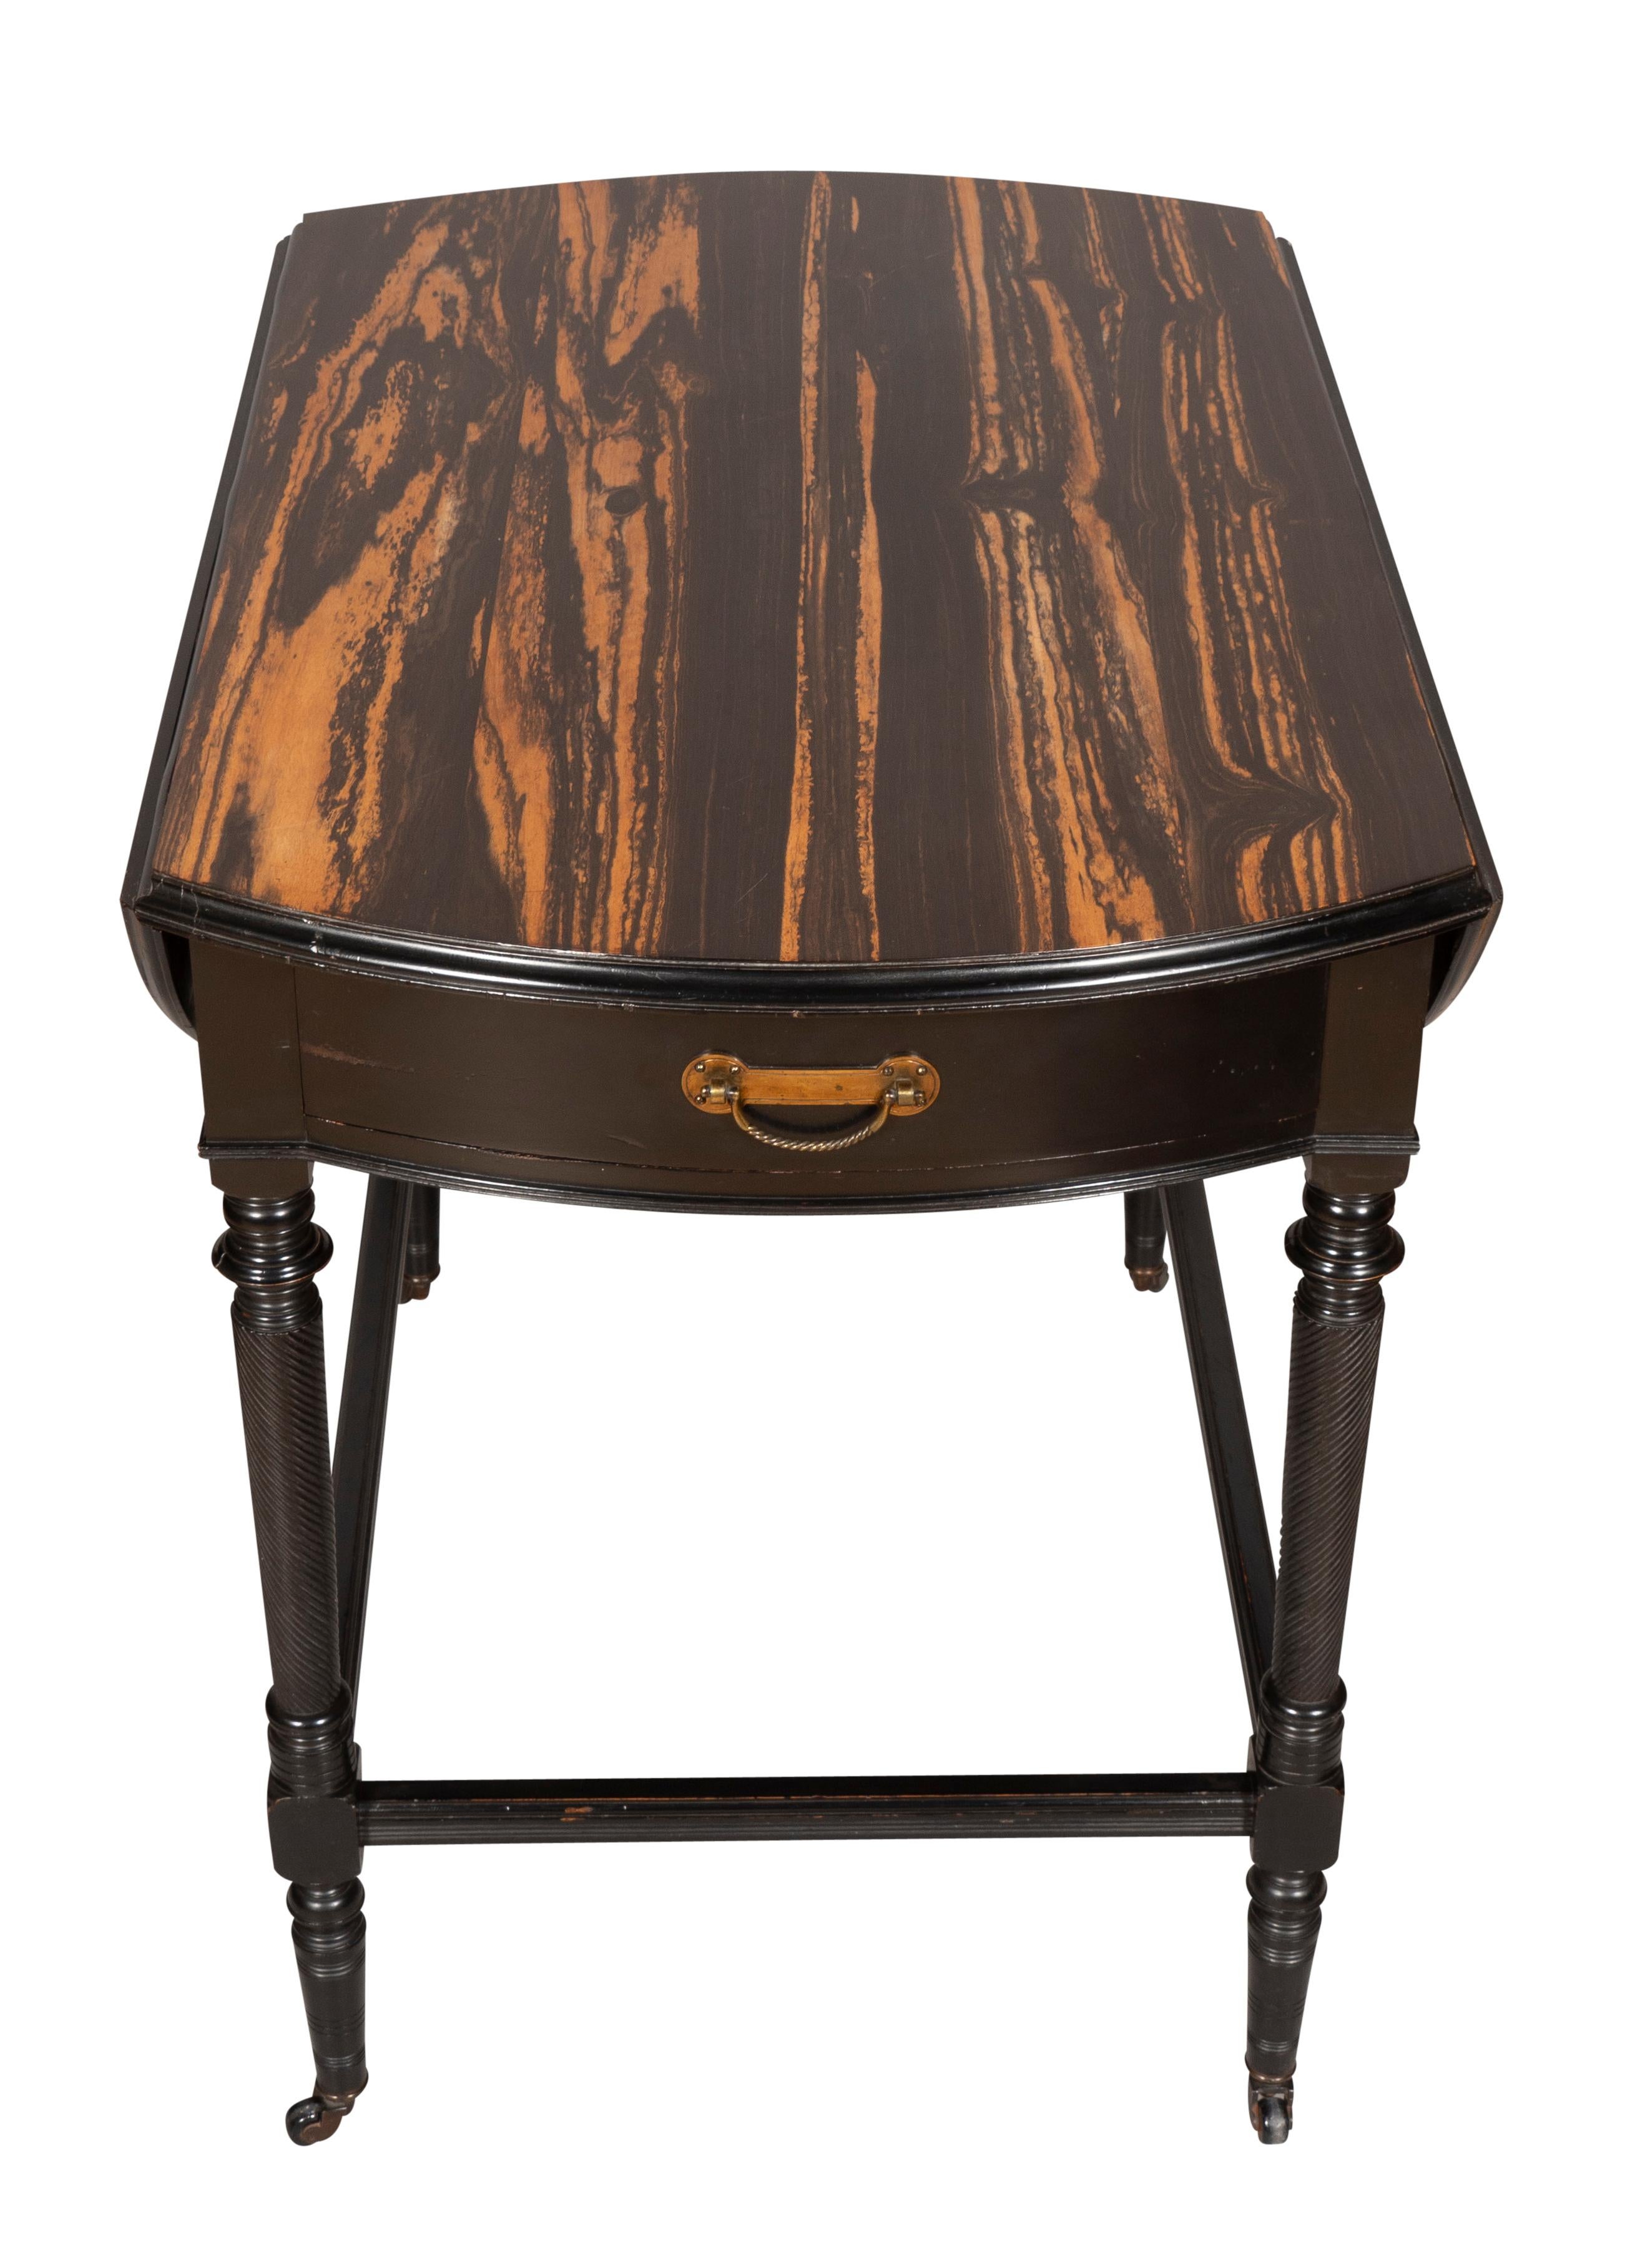 Aesthetic Movement Calamander and Ebonized Pembroke Table For Sale 7